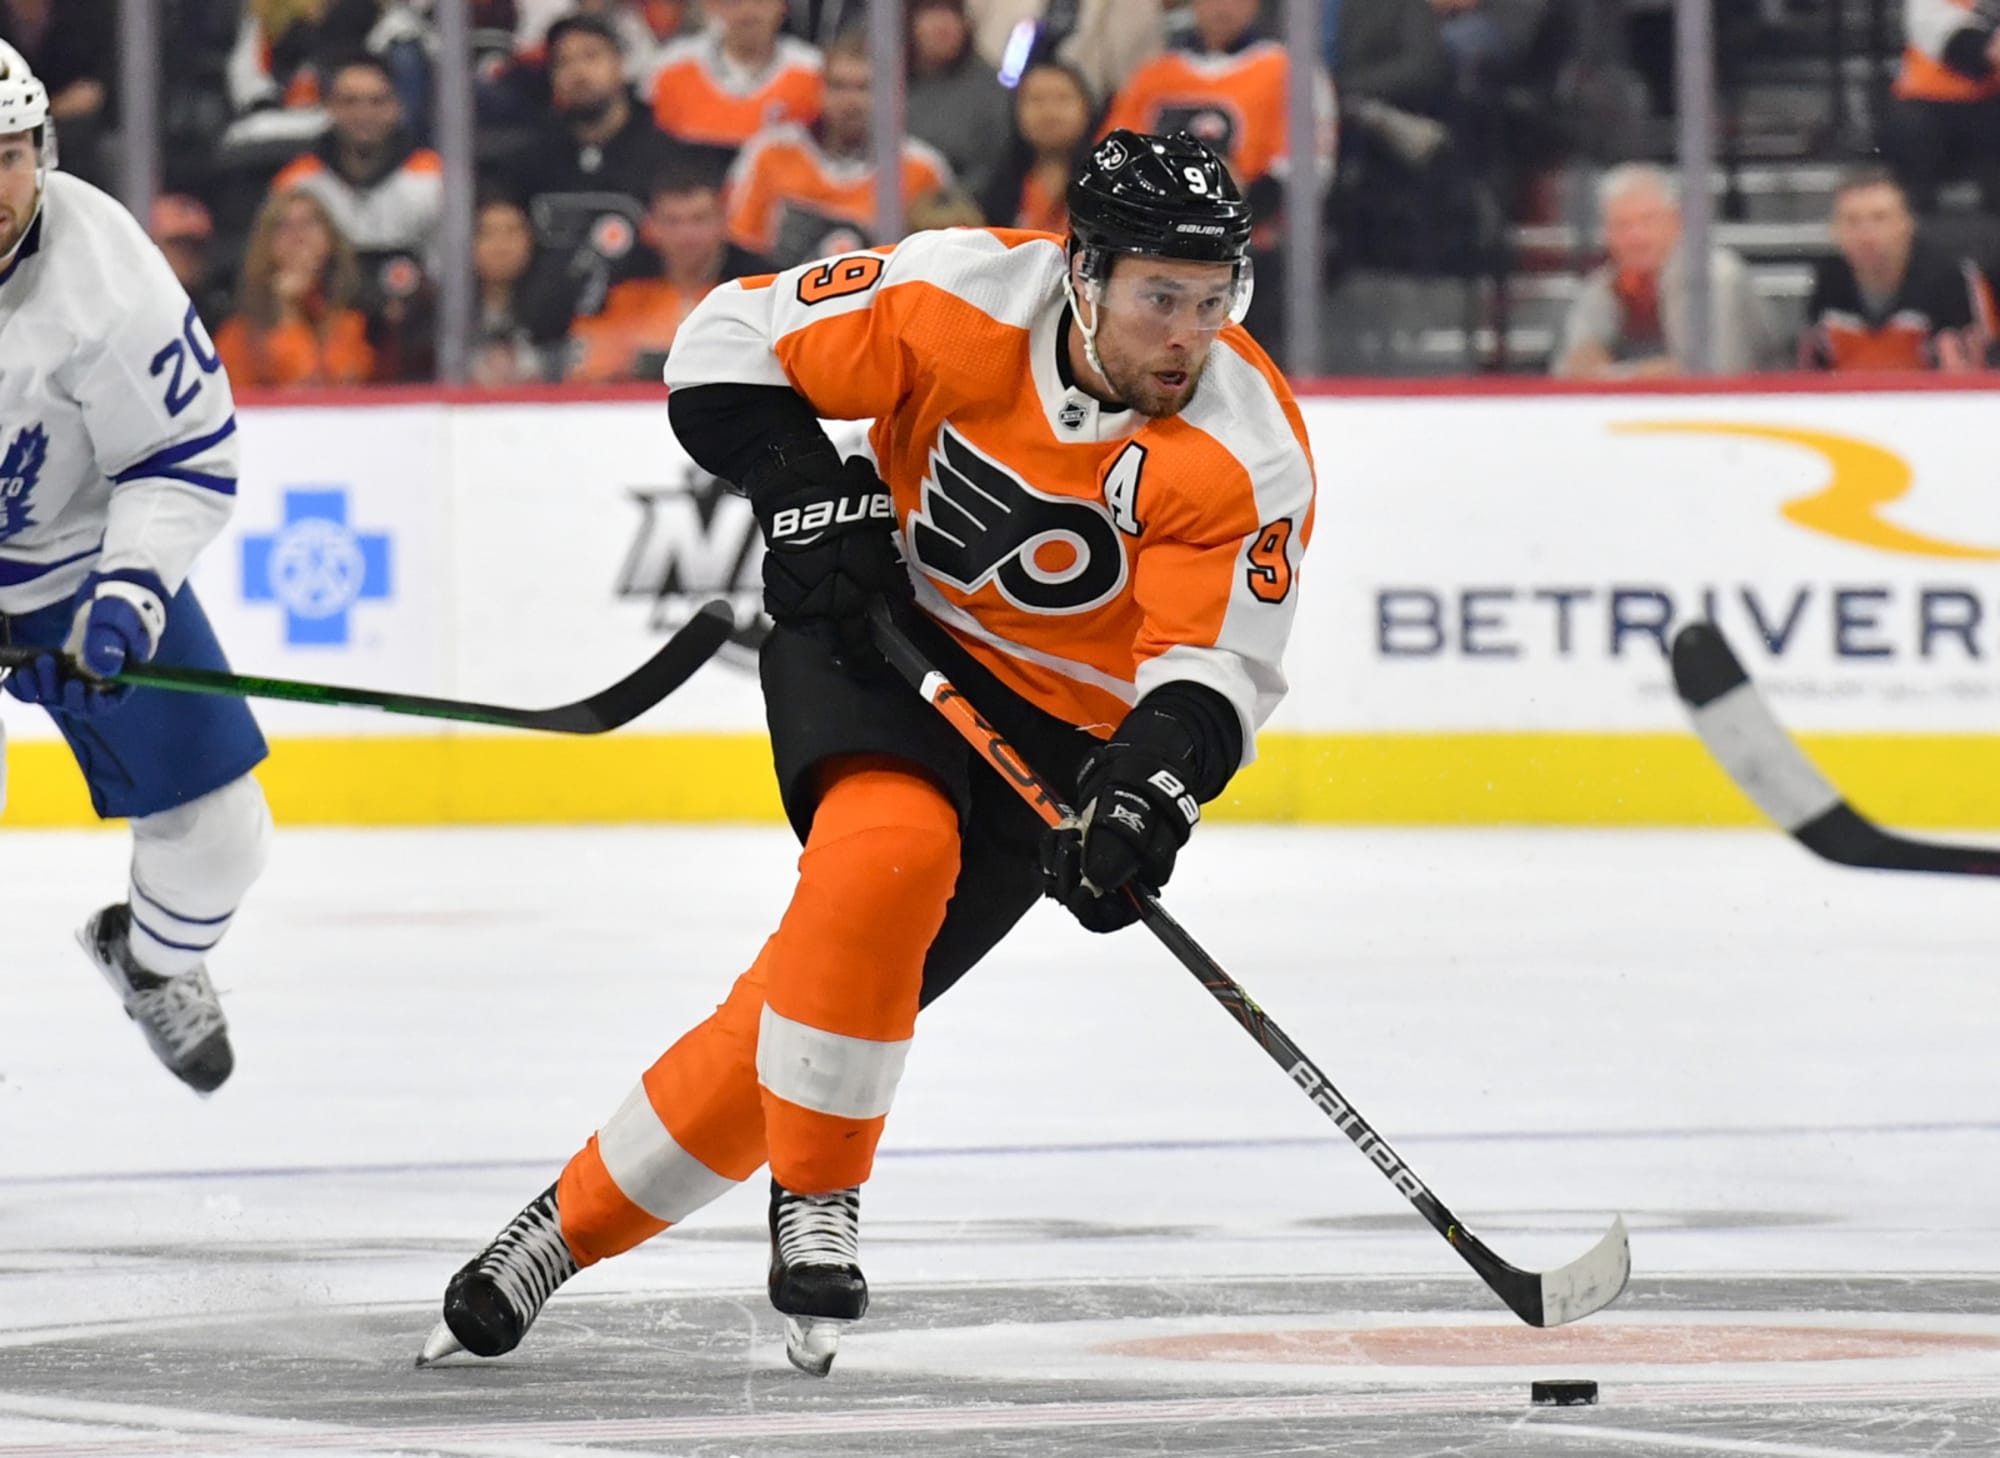 WOW! Ivan Provorov refused to participate in Flyers warmup tonight